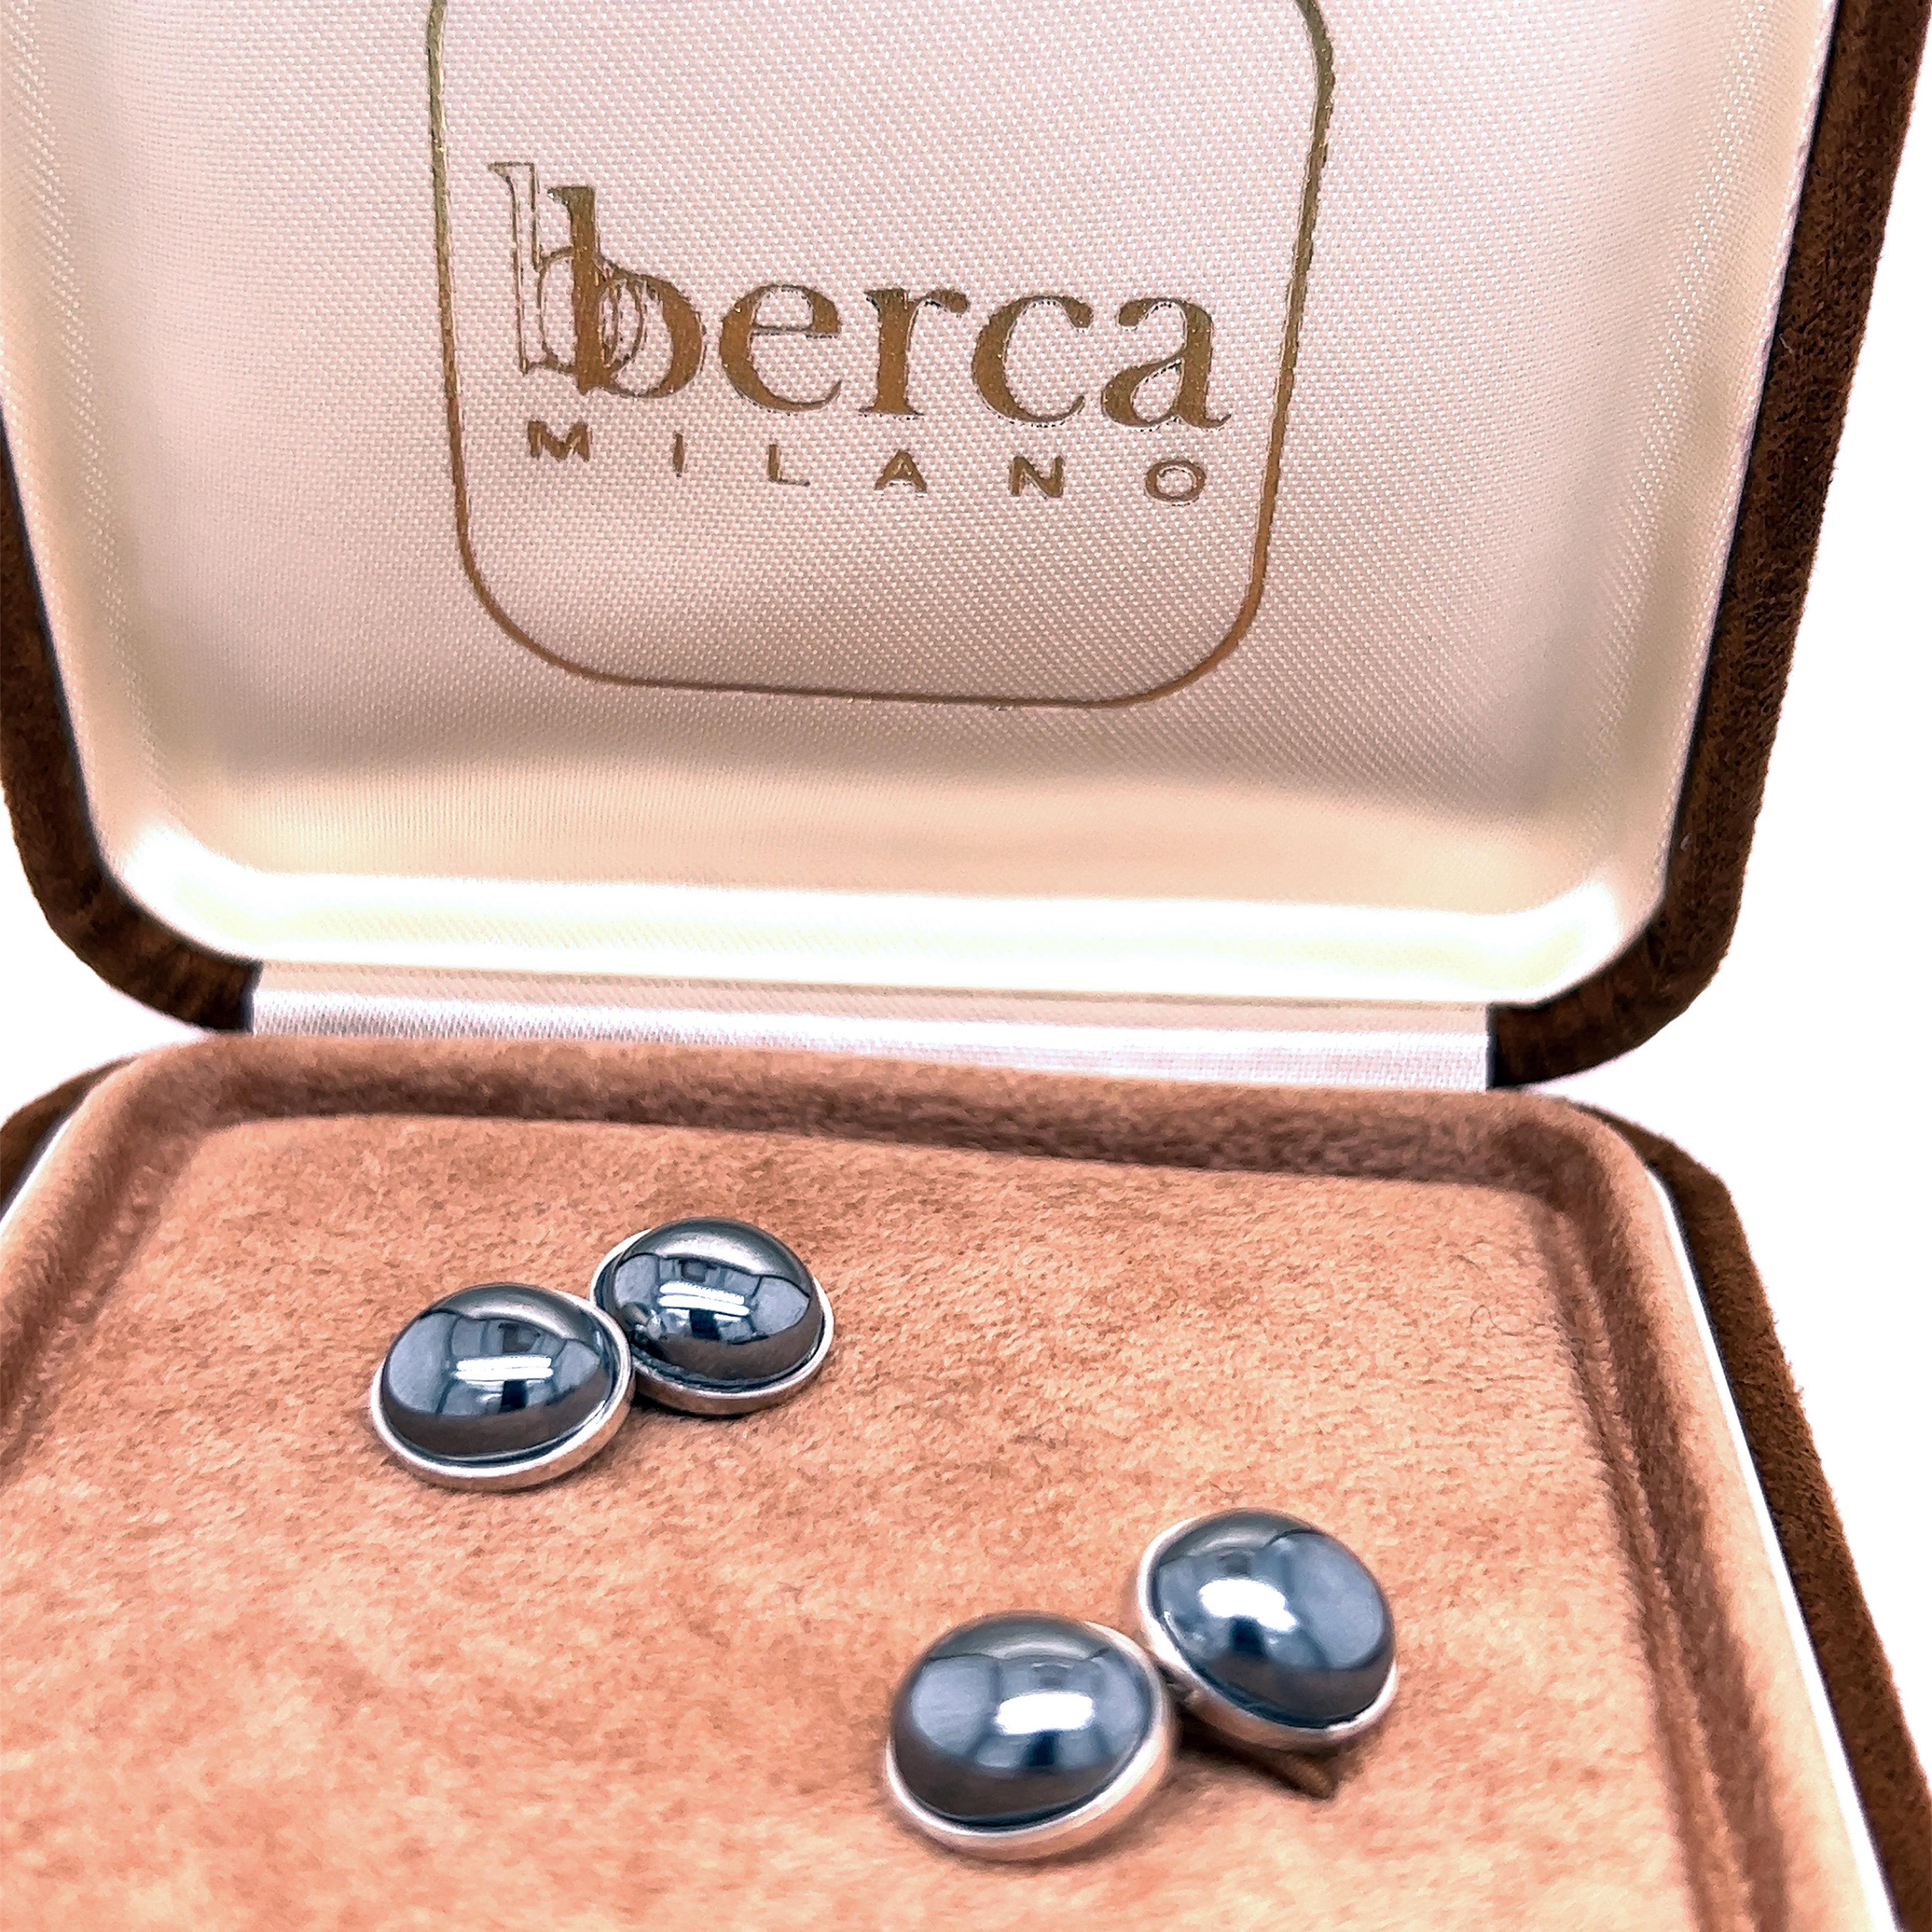 Oval Cut Berca Natural Hematite Cabochon Oval Shaped Sterling Silver Cufflinks For Sale